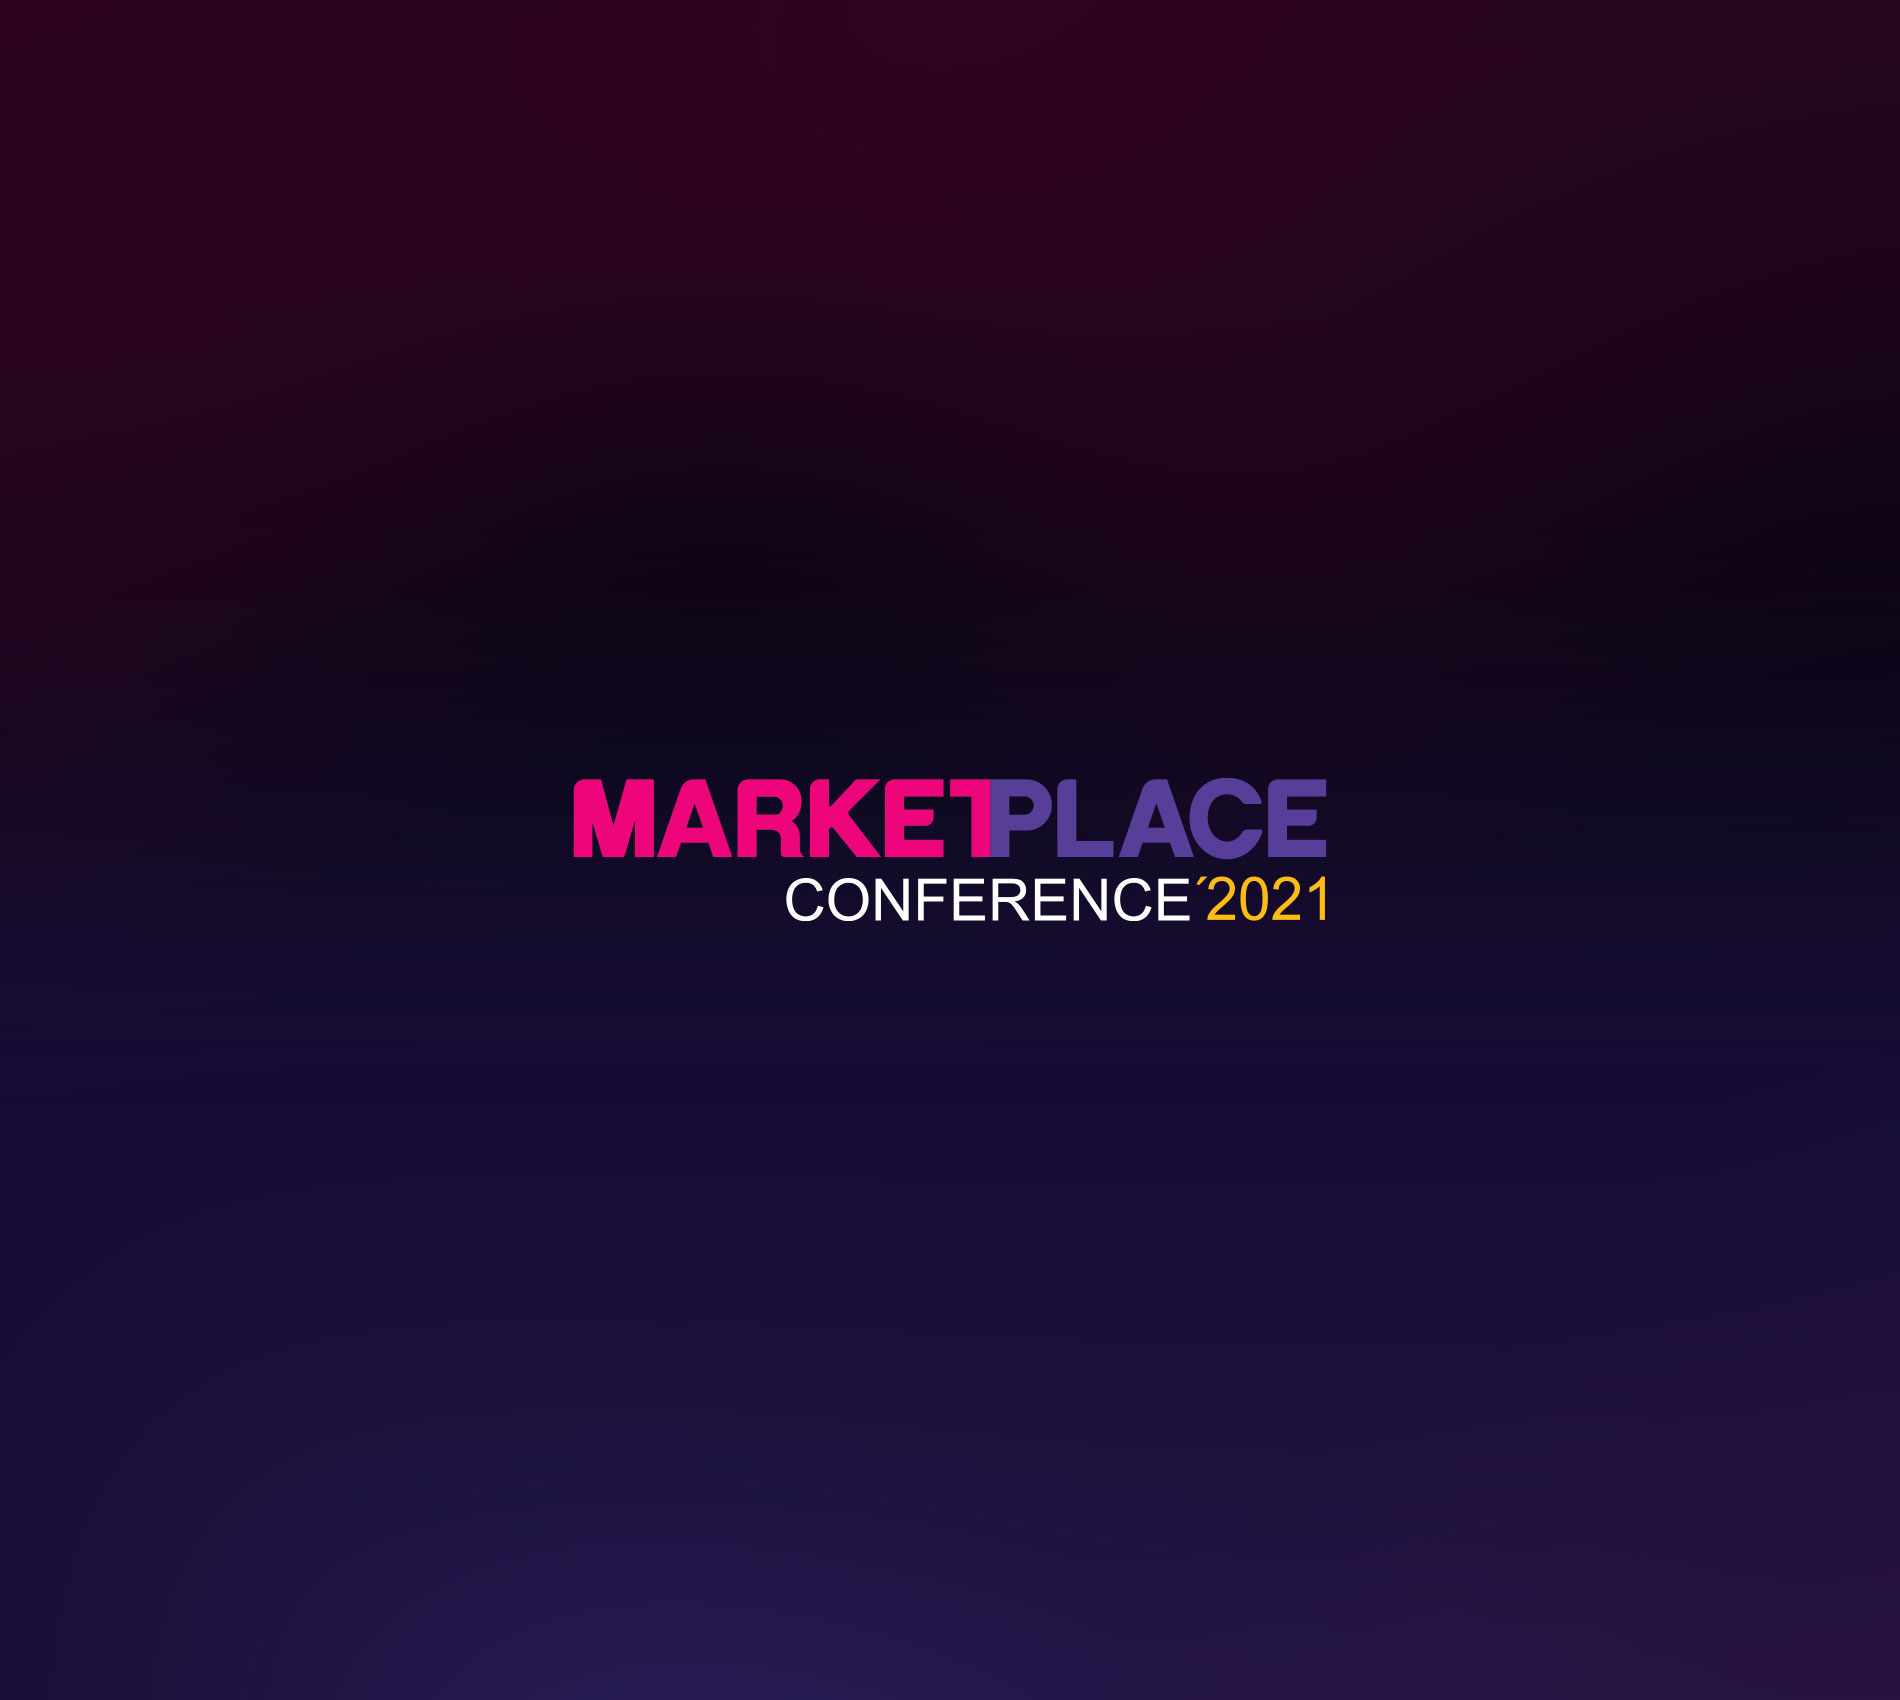 Marketplace Conference 2021